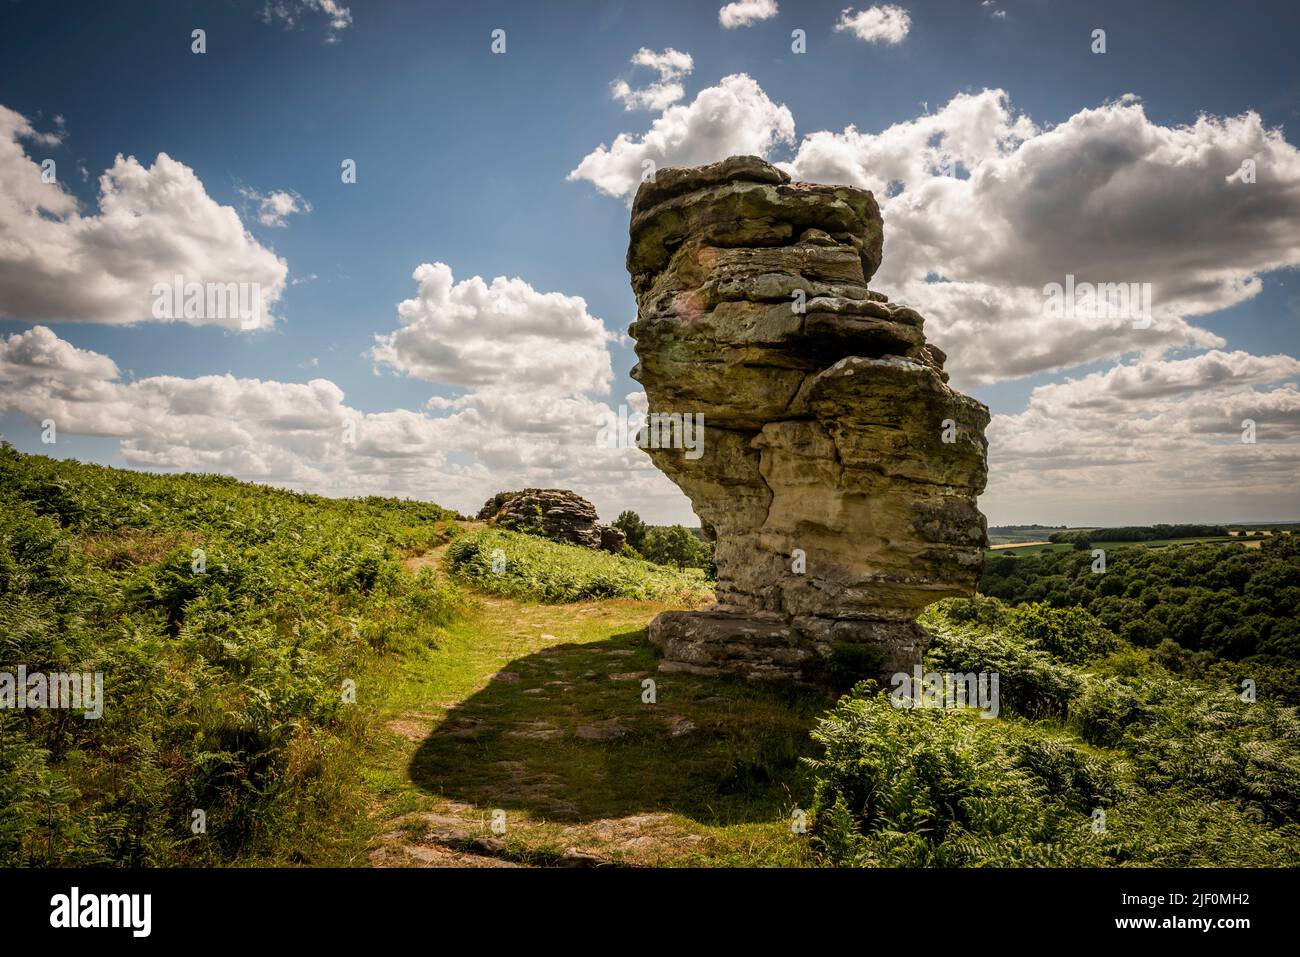 The Bridestones natural rock formations created by erosion in the Dalby Forest, North Yorkshire, UK Stock Photo